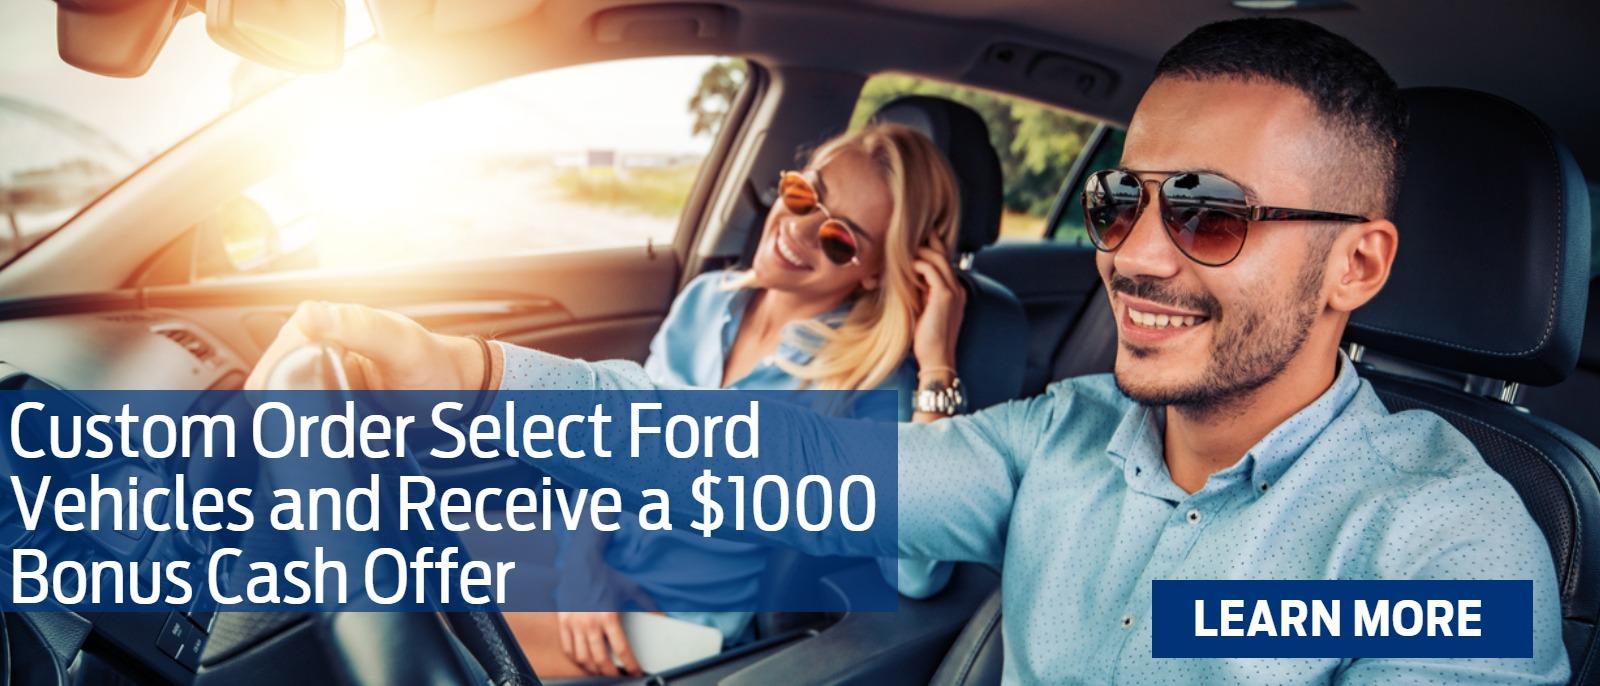 Custom Order Select Ford Vehicles and Receive a $1000 Bonus Cash Offe